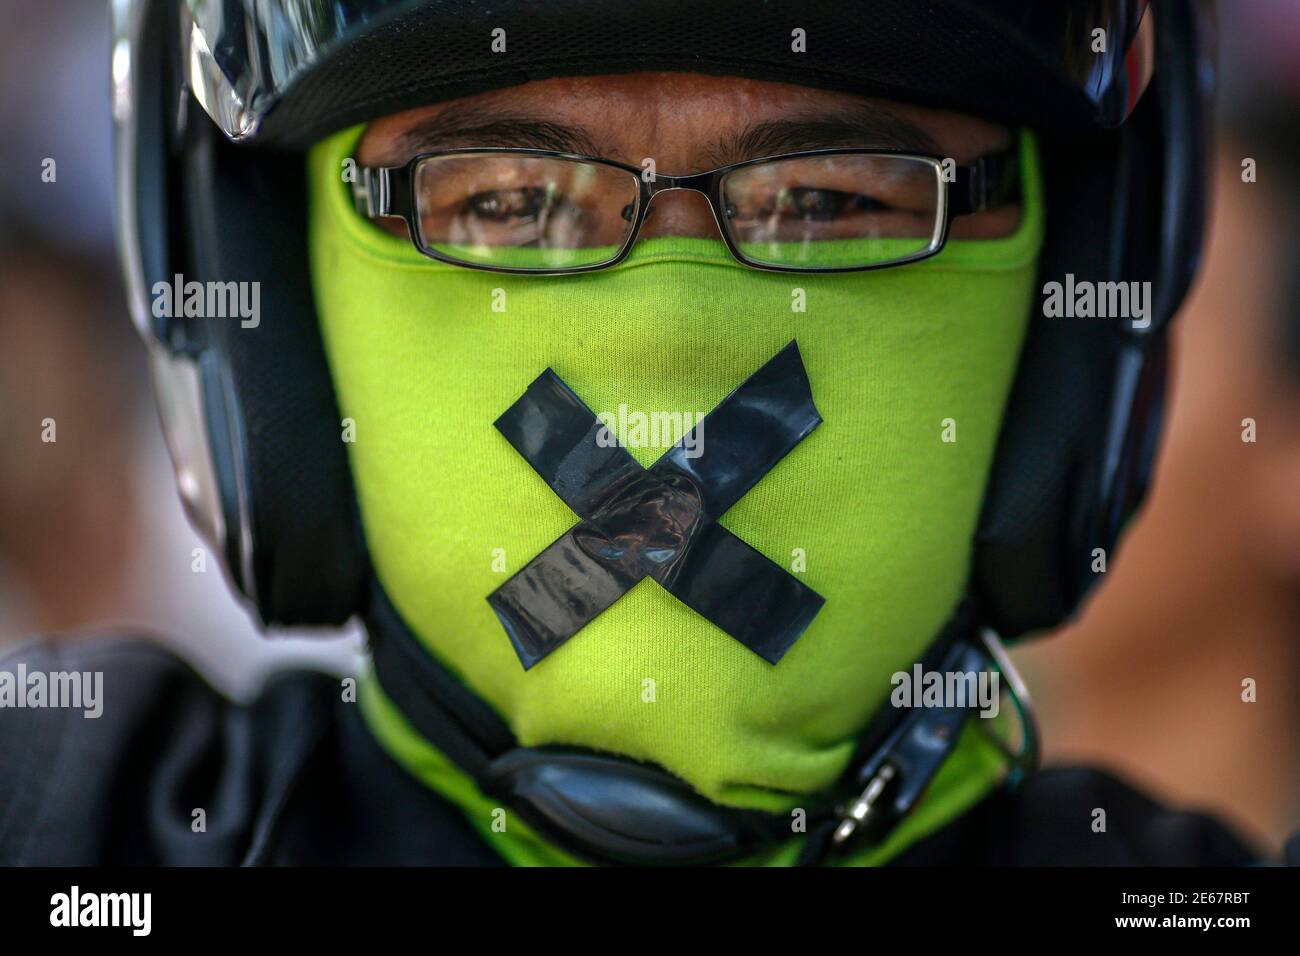 A man who covered his face and his mouth taped up attends a protest against military rule in Bangkok May 24, 2014. Former Prime Minister Yingluck Shinawatra was in a 'safe place' on Saturday, an aide said, after being held by Thailand's army following its seizure of power this week, as opposition to the coup grew among her supporters and pro-democracy activists. REUTERS/Athit Perawongmetha  (THAILAND - Tags: POLITICS CIVIL UNREST) Stock Photo